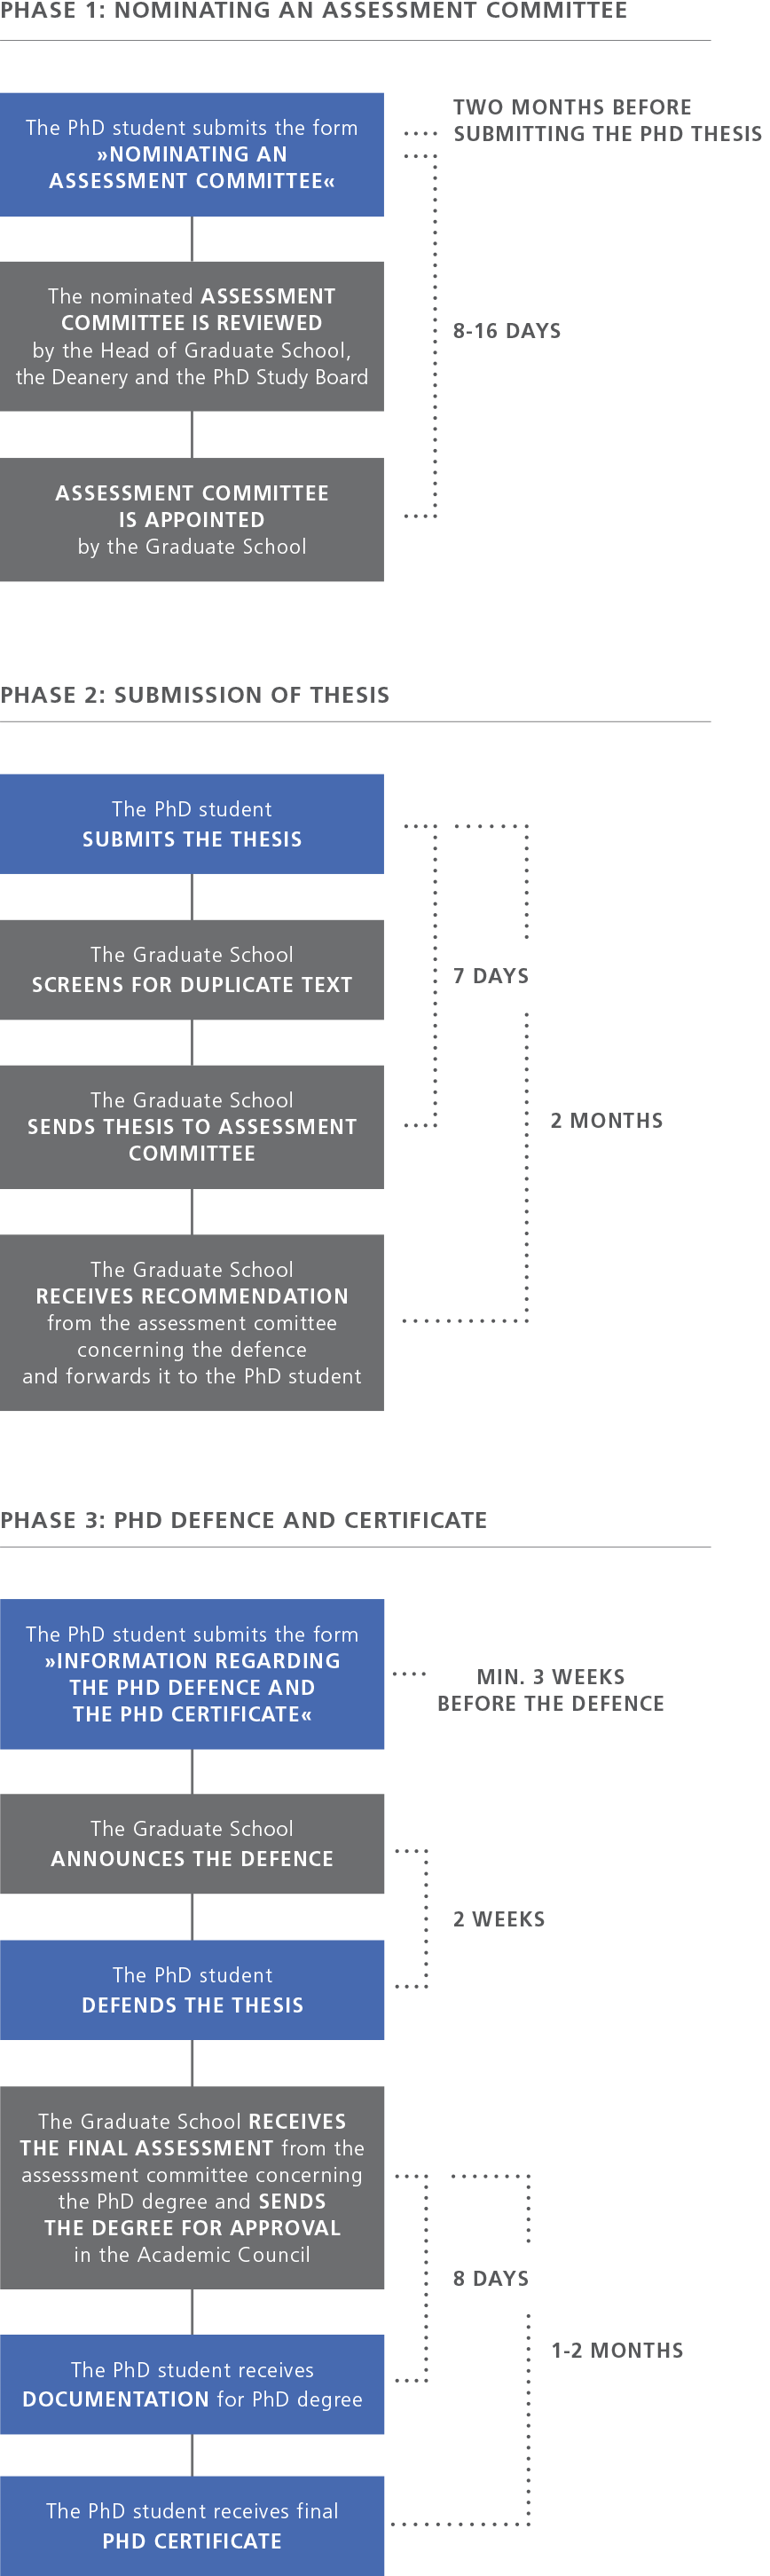 The illustration includes phase 1: Nominating as assessment committee, phase 2: Submission of thesis, phase 3: PhD defence and certificate